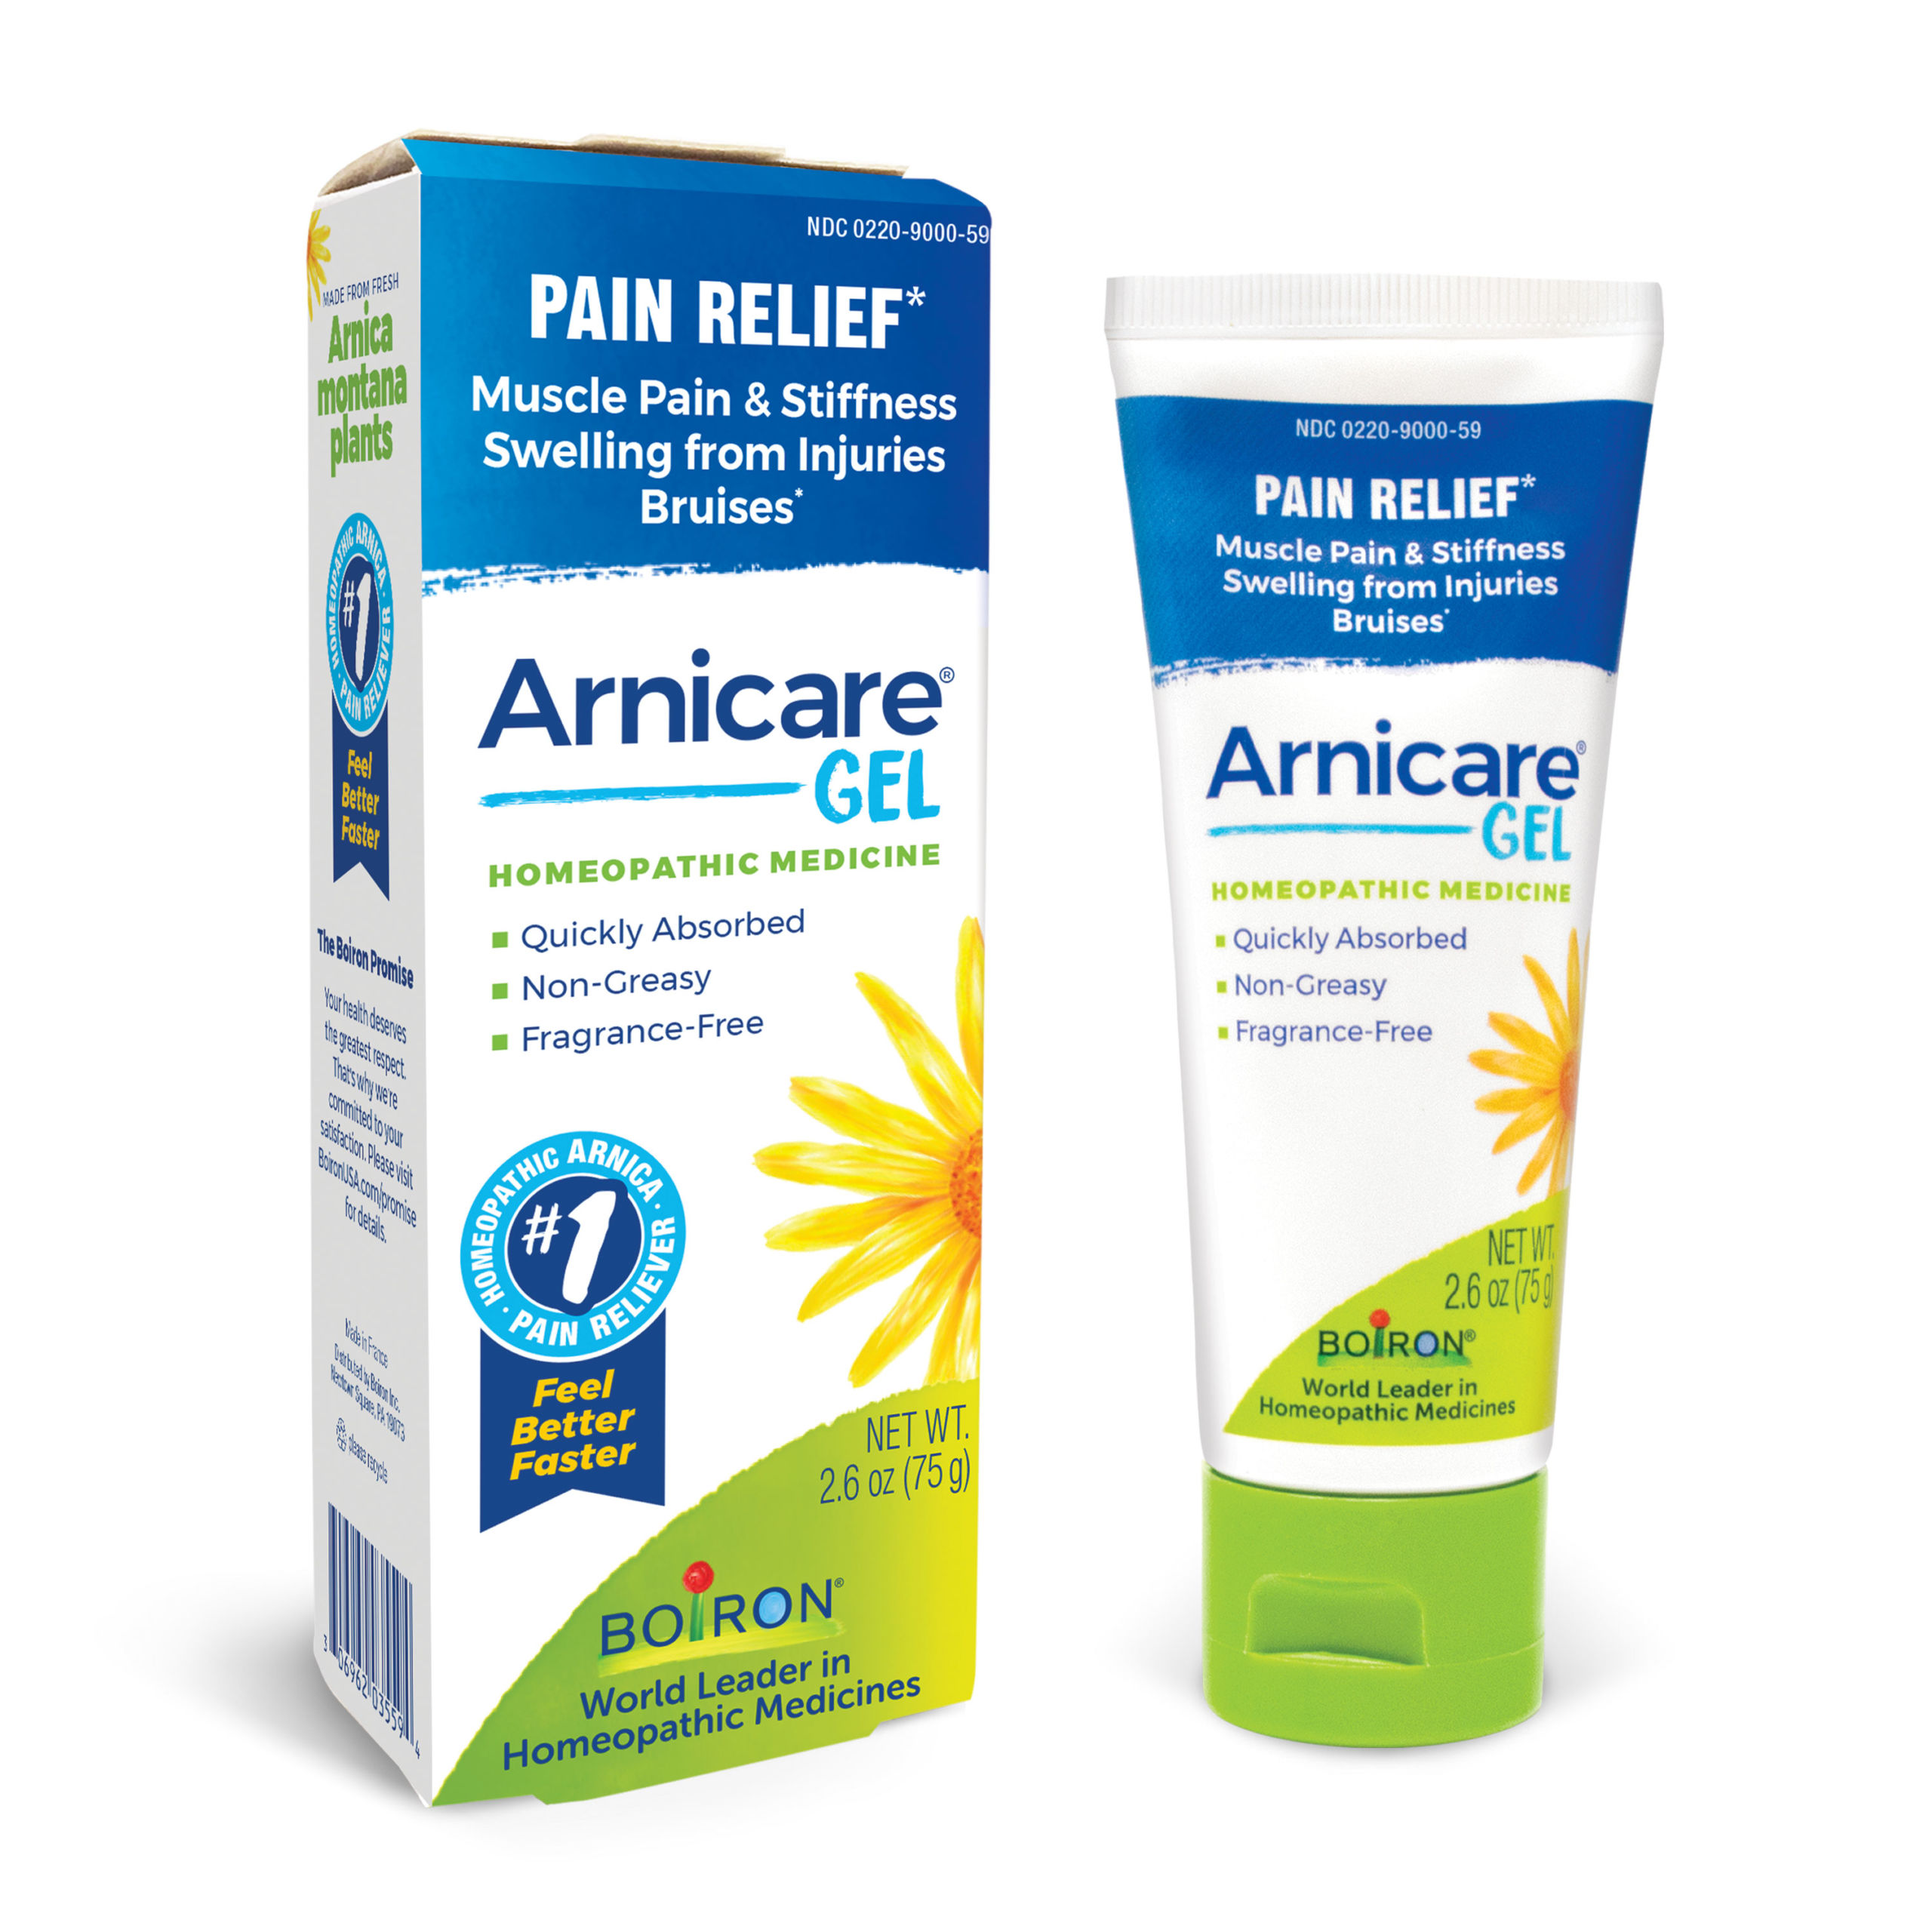 Arnicare Pain Relieving Topicals | Arnicare for Pain Relief and Bruising